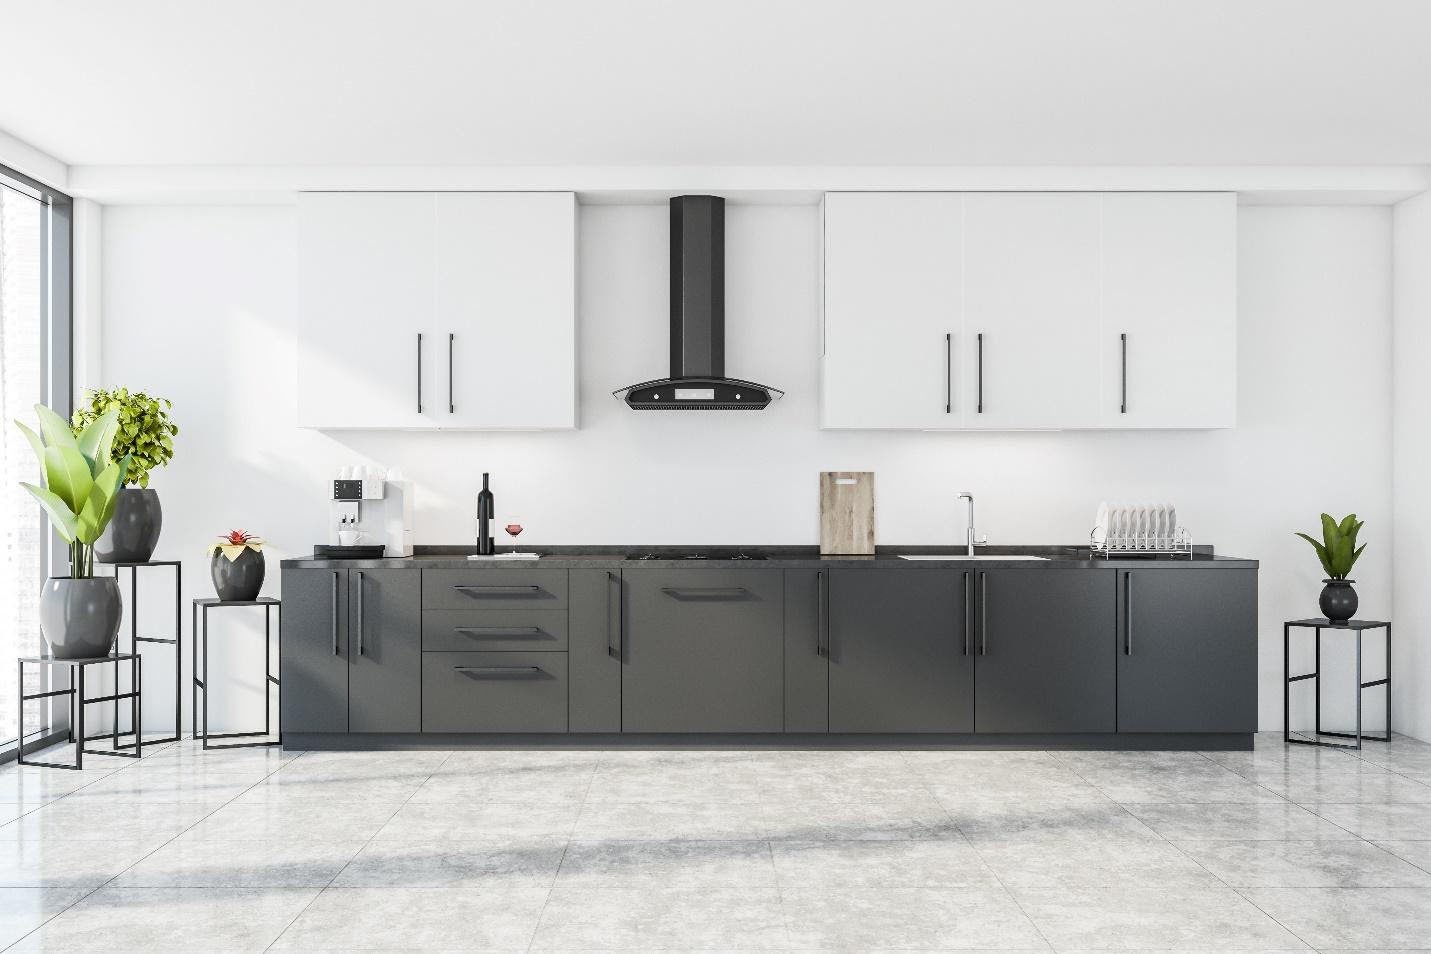 Ways to Compare cost of modular kitchens